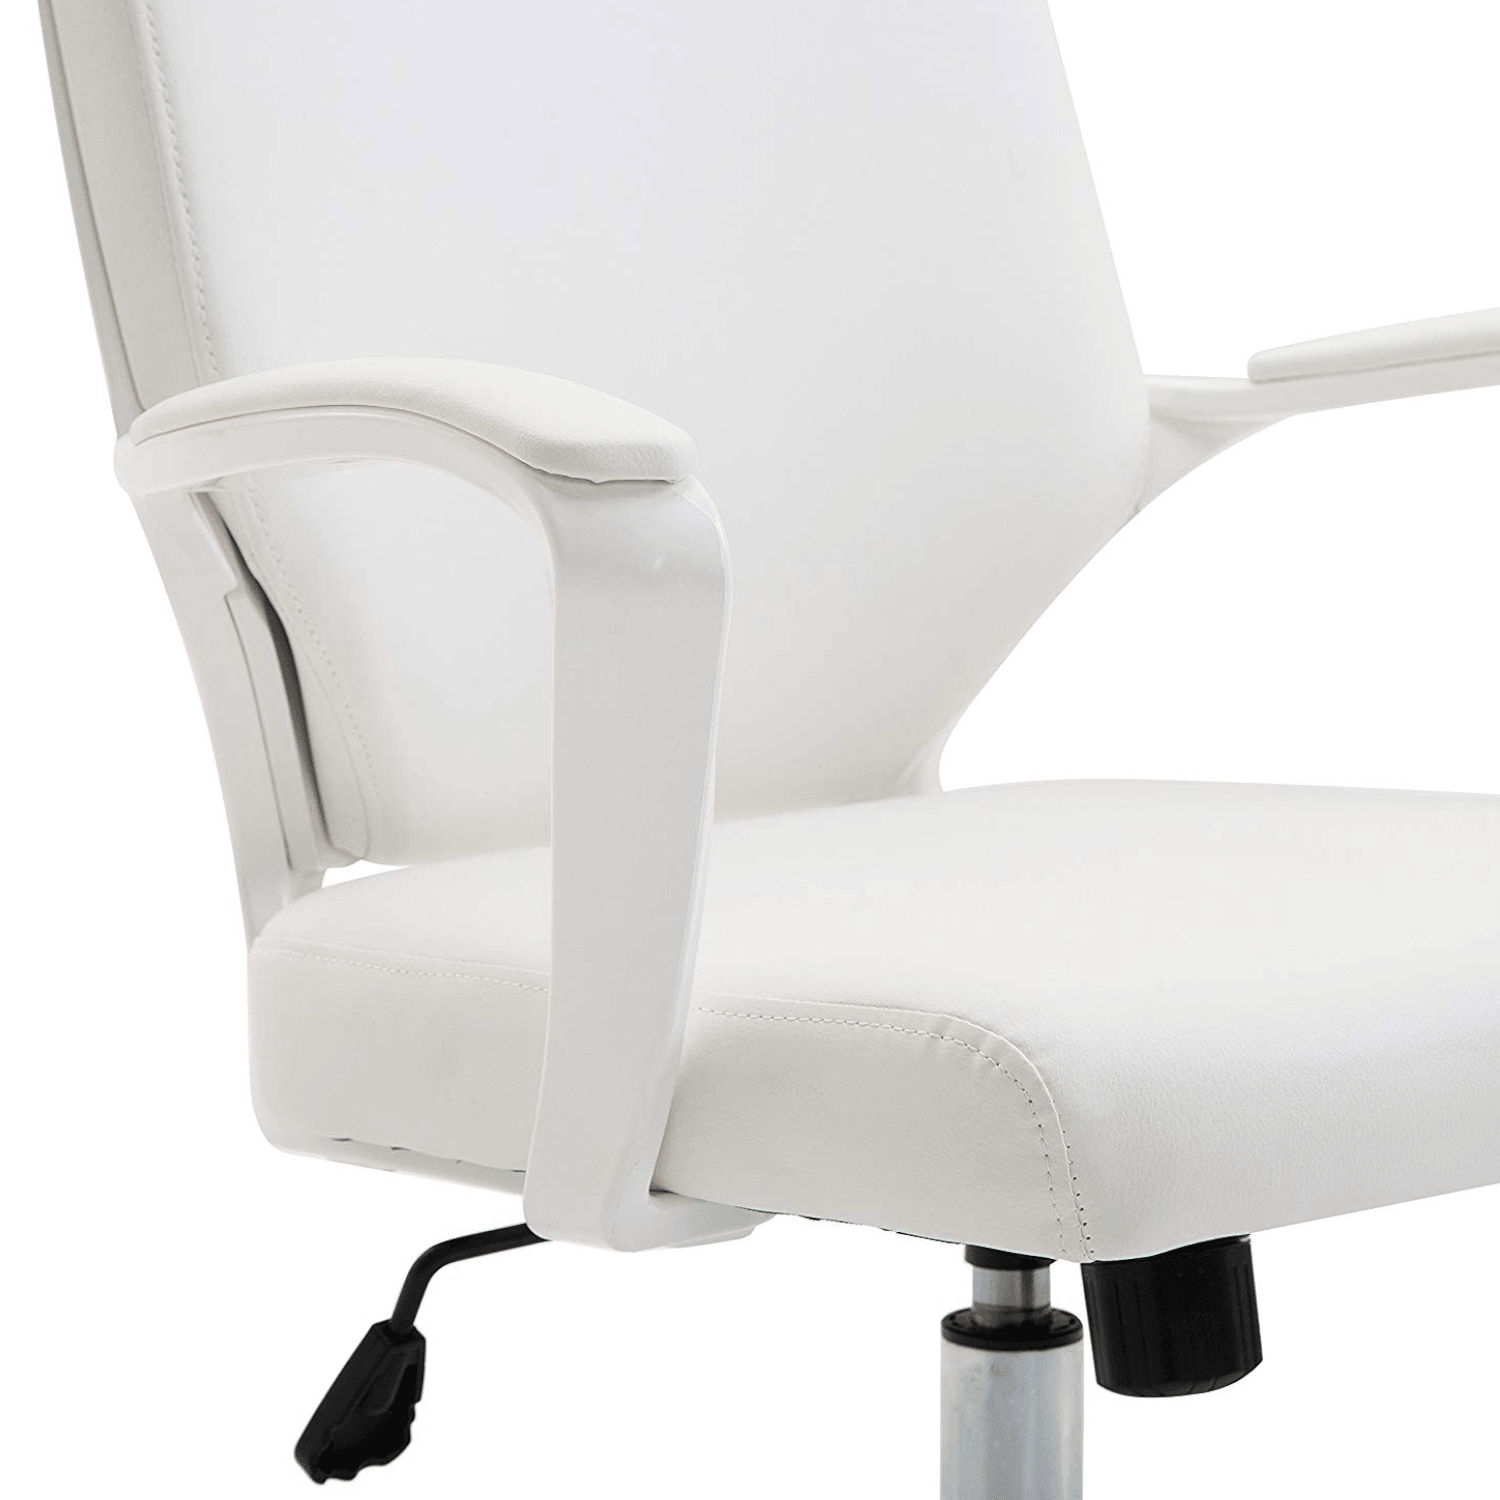 Cherry Tree Furniture High Back Modern Design PU Leather Swivel Office Chair Computer Desk Chair, MO68 White